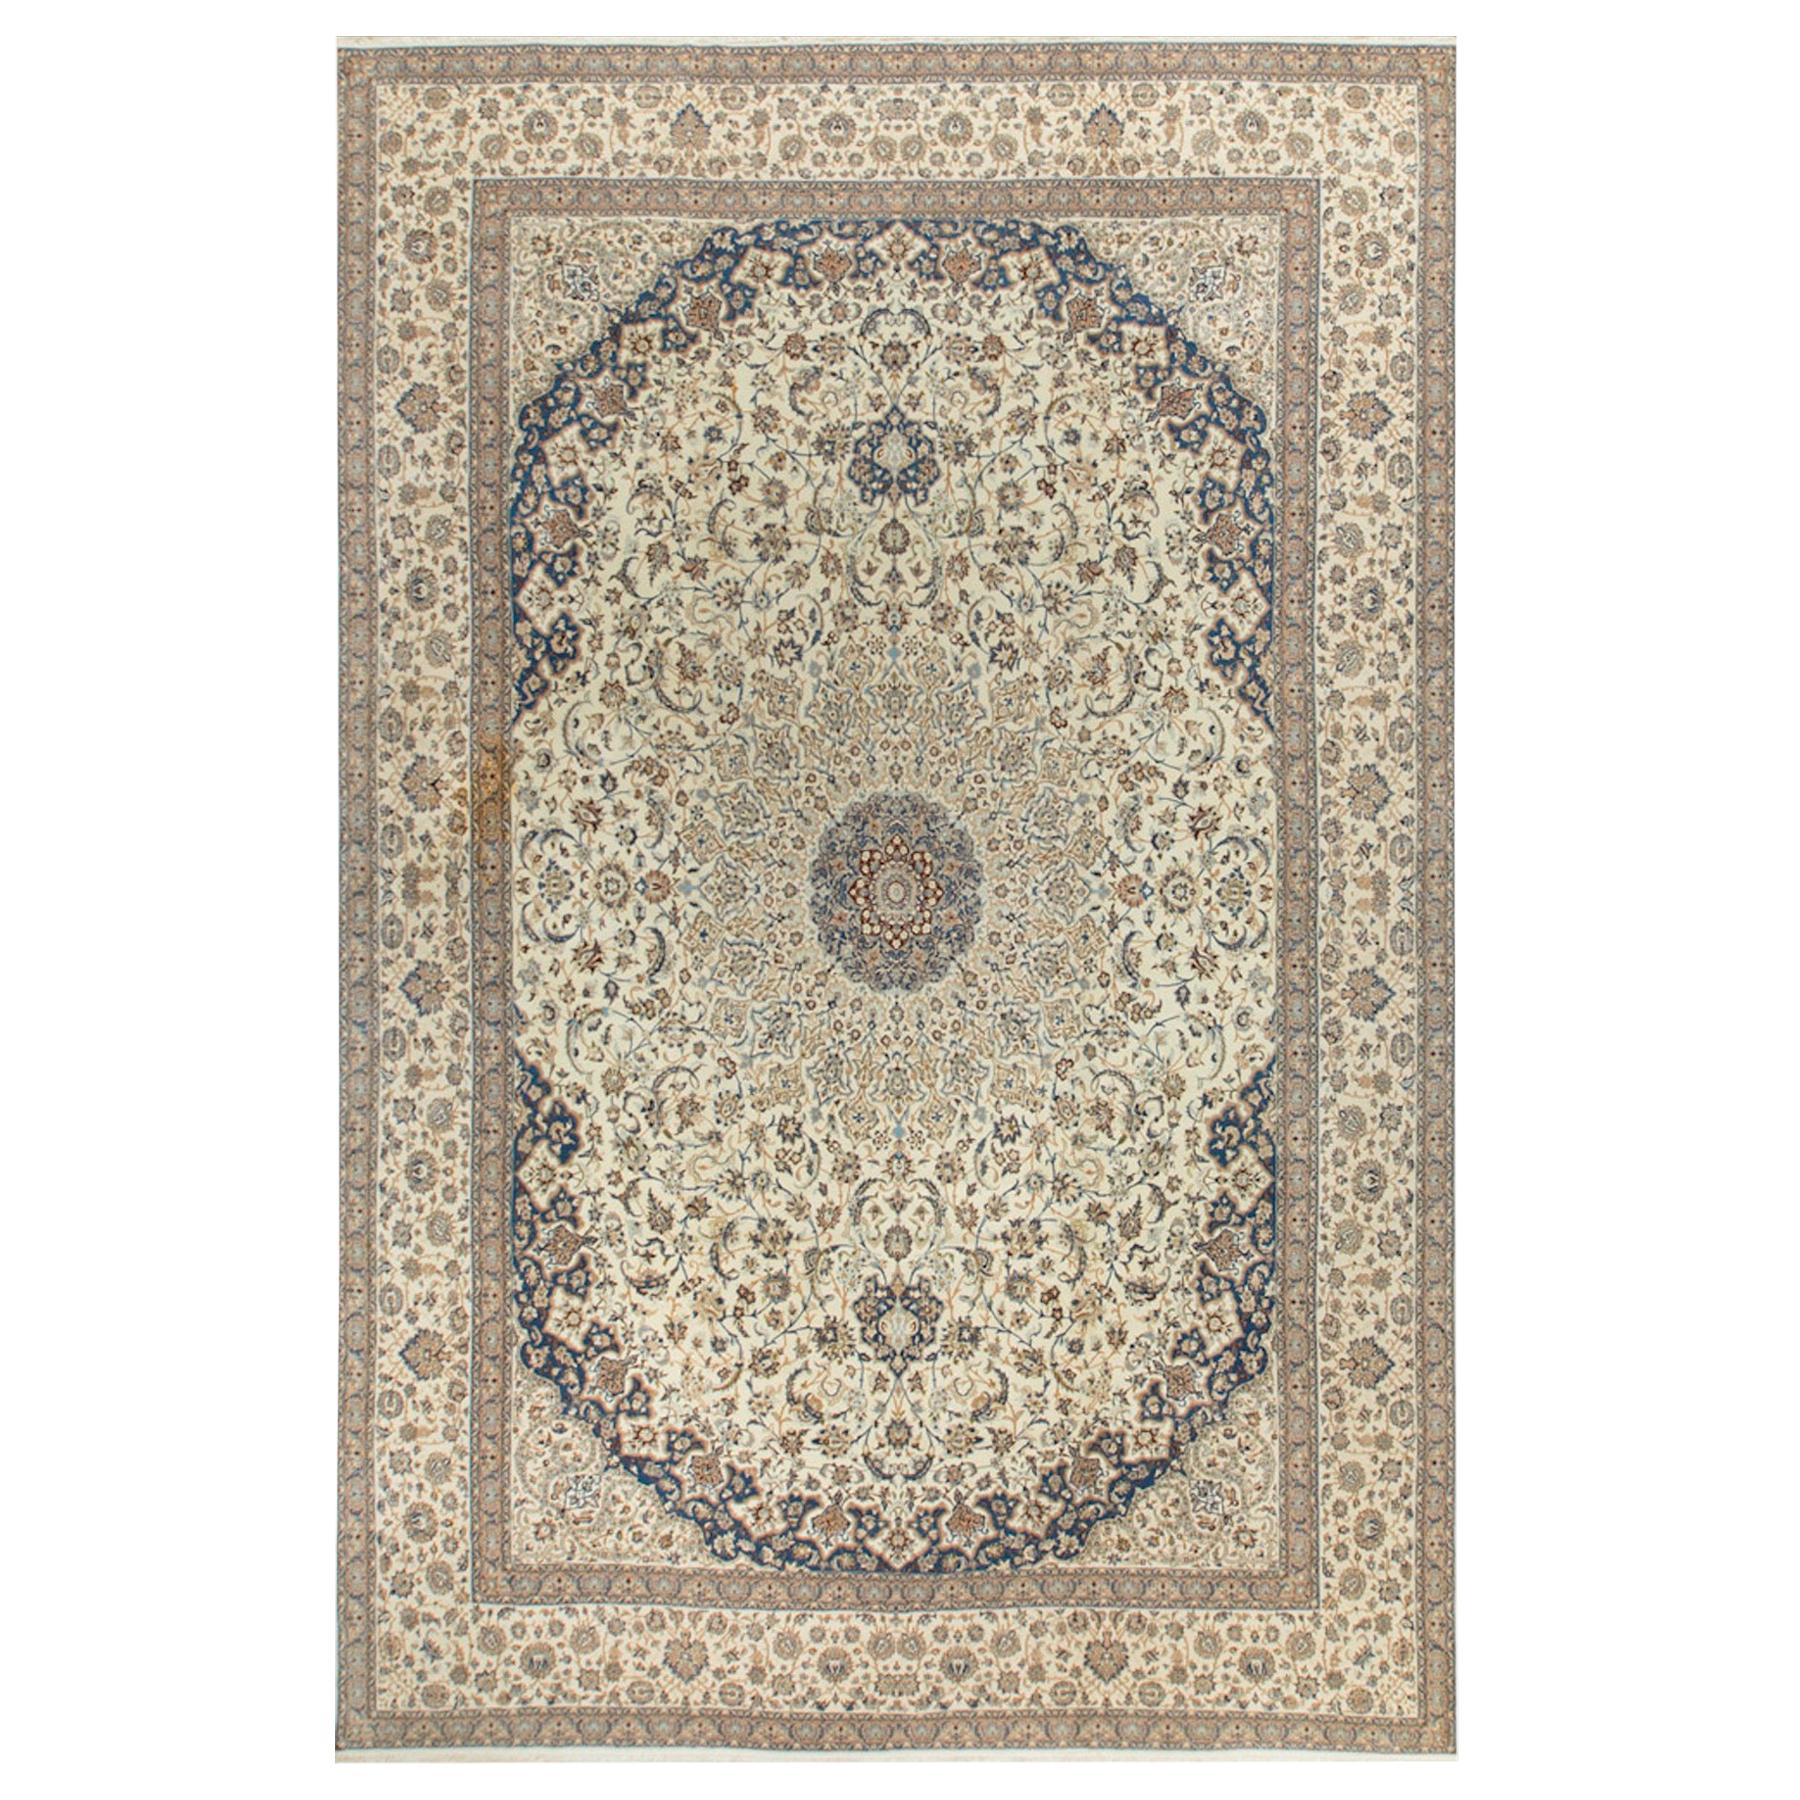 Fine Nain Oversize Vintage Persian Wool and Silk Rug, 13'4" x 20'8" For Sale